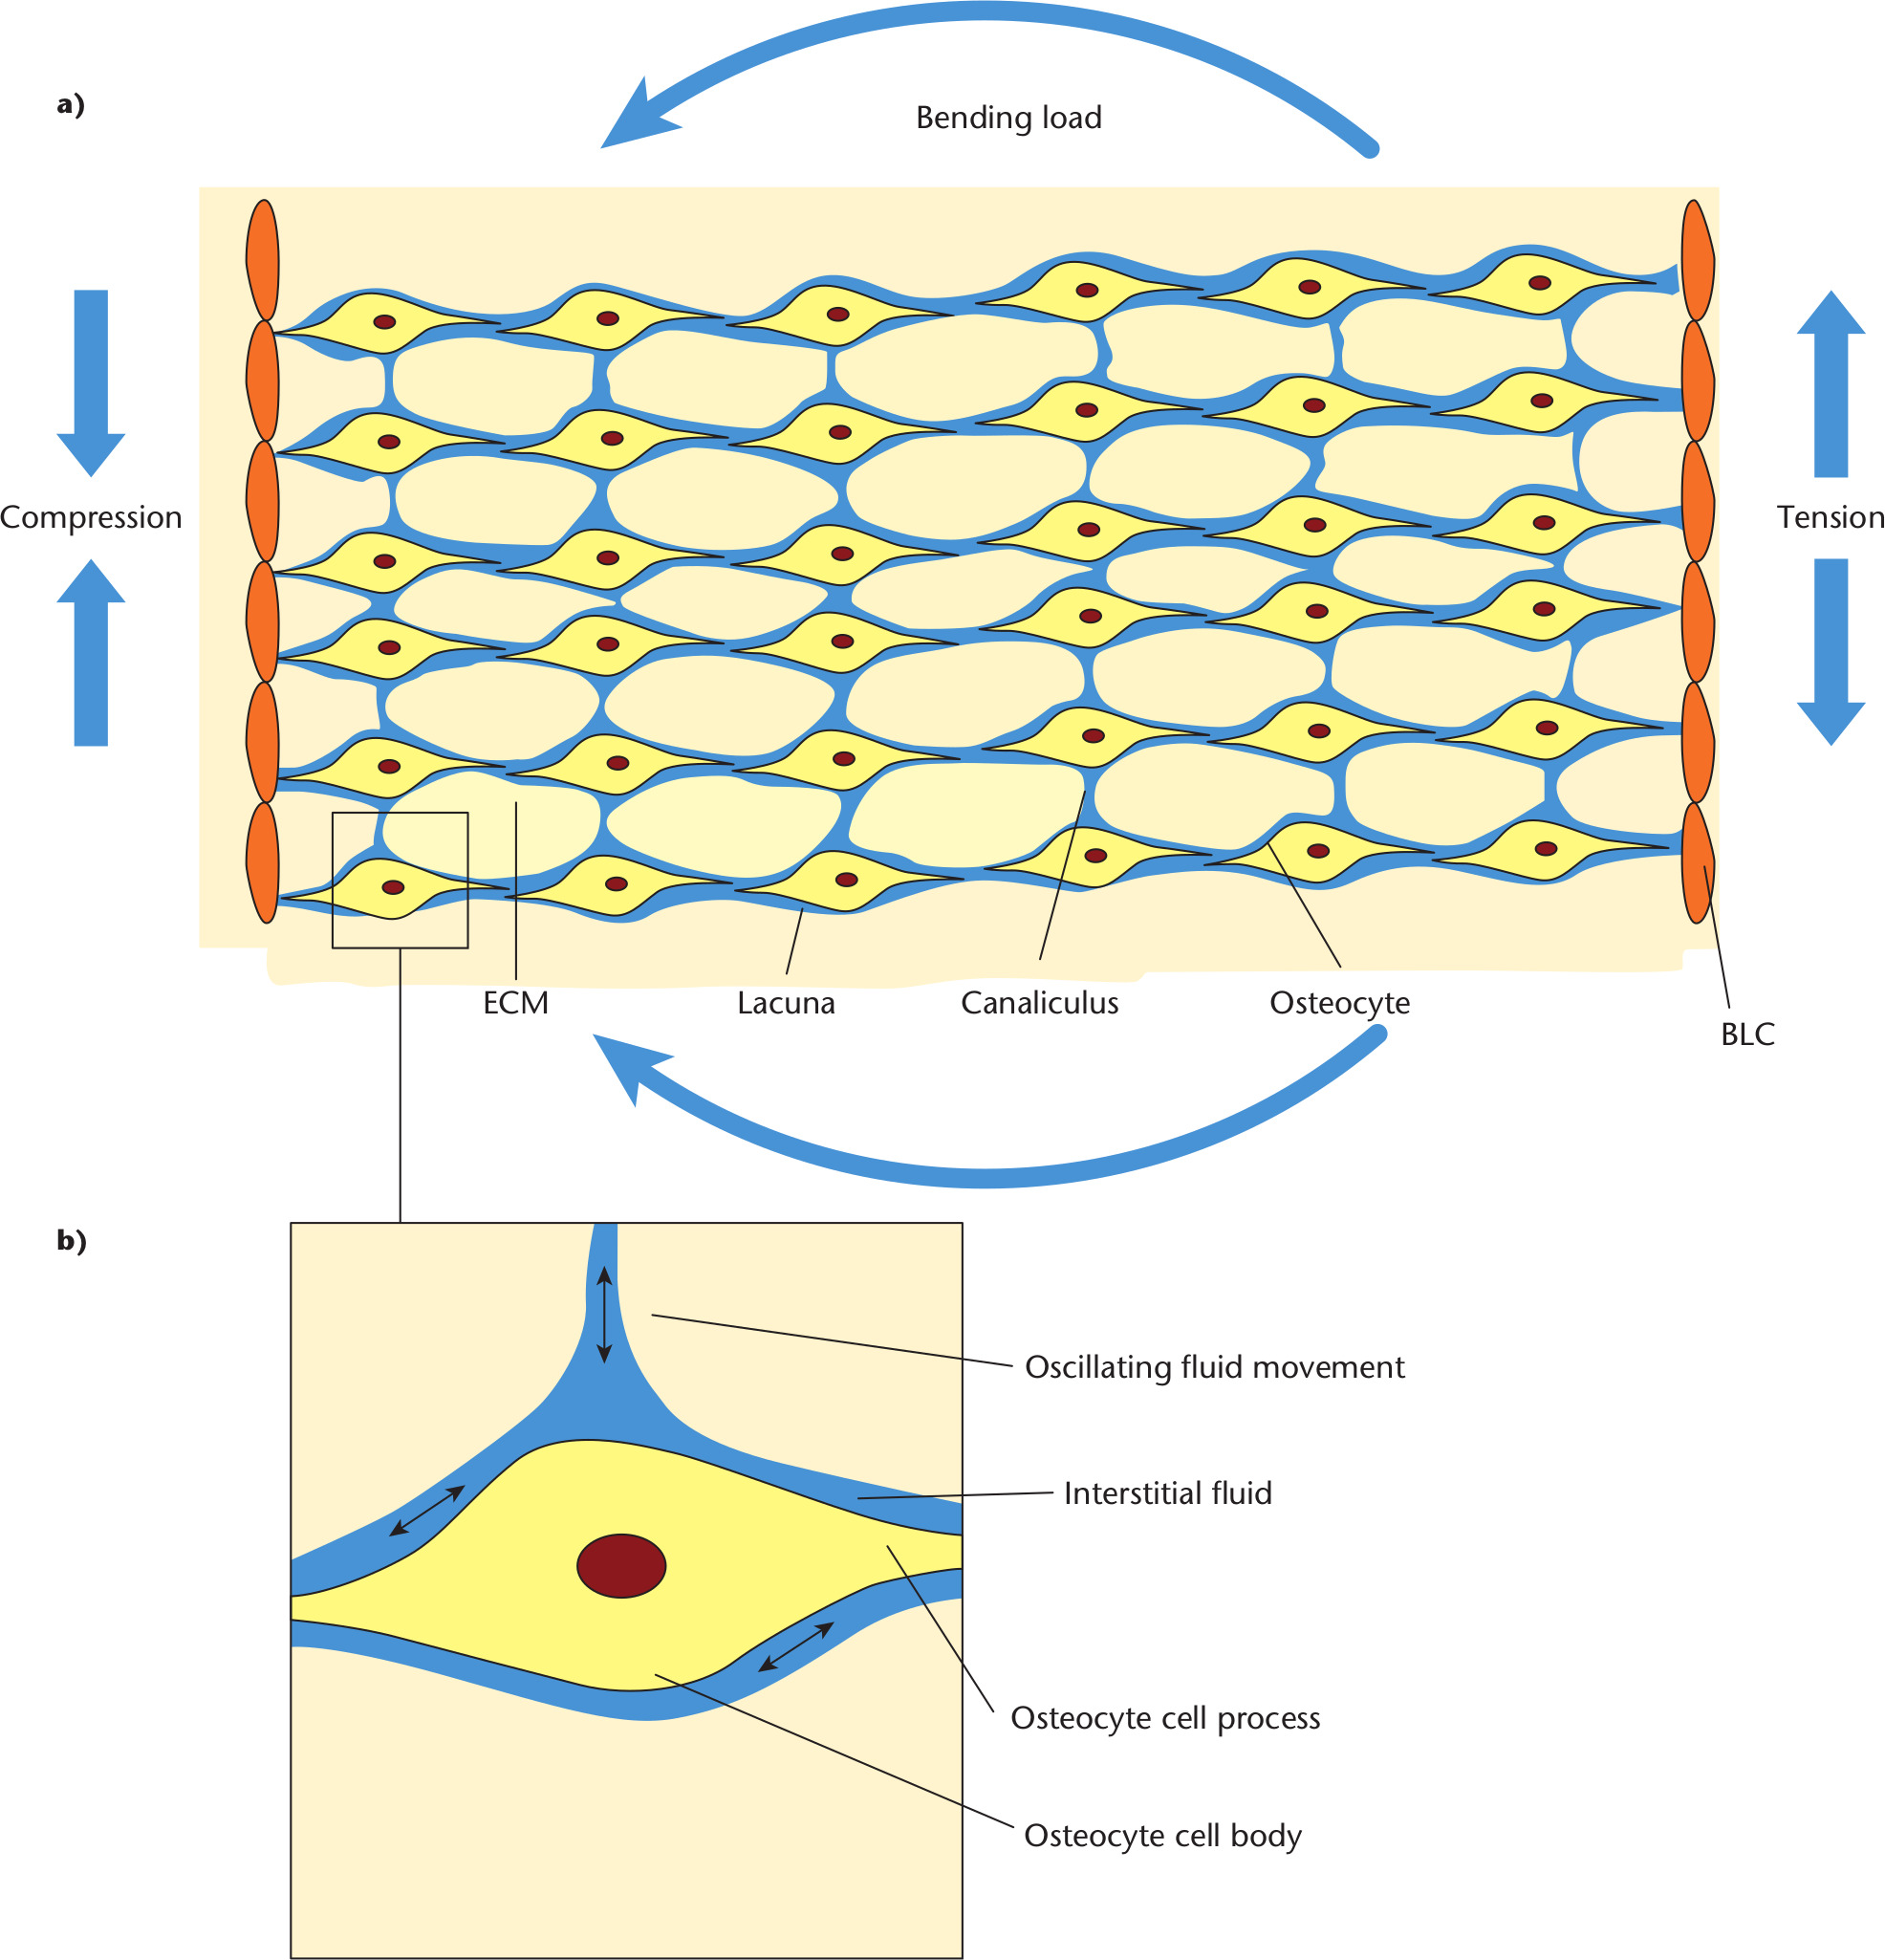 Fig. 1 
            Bone cellular architecture. a) Mechanical loading of bone causes tension and compression forces across the bone’s lacuno-canalicular (LC) network. b) The tension/compression forces cause interstitial fluid shift within the LC network in an oscillatory manner across the cell membrane. BLC, bone lining cell; ECM, extracellular matrix. Adapted with permission from Duncan RL, Turner CH. Mechanotransduction and the functional response of bone to mechanical strain. Calcif Tissue Int. 1995;57(5):344-358.
          